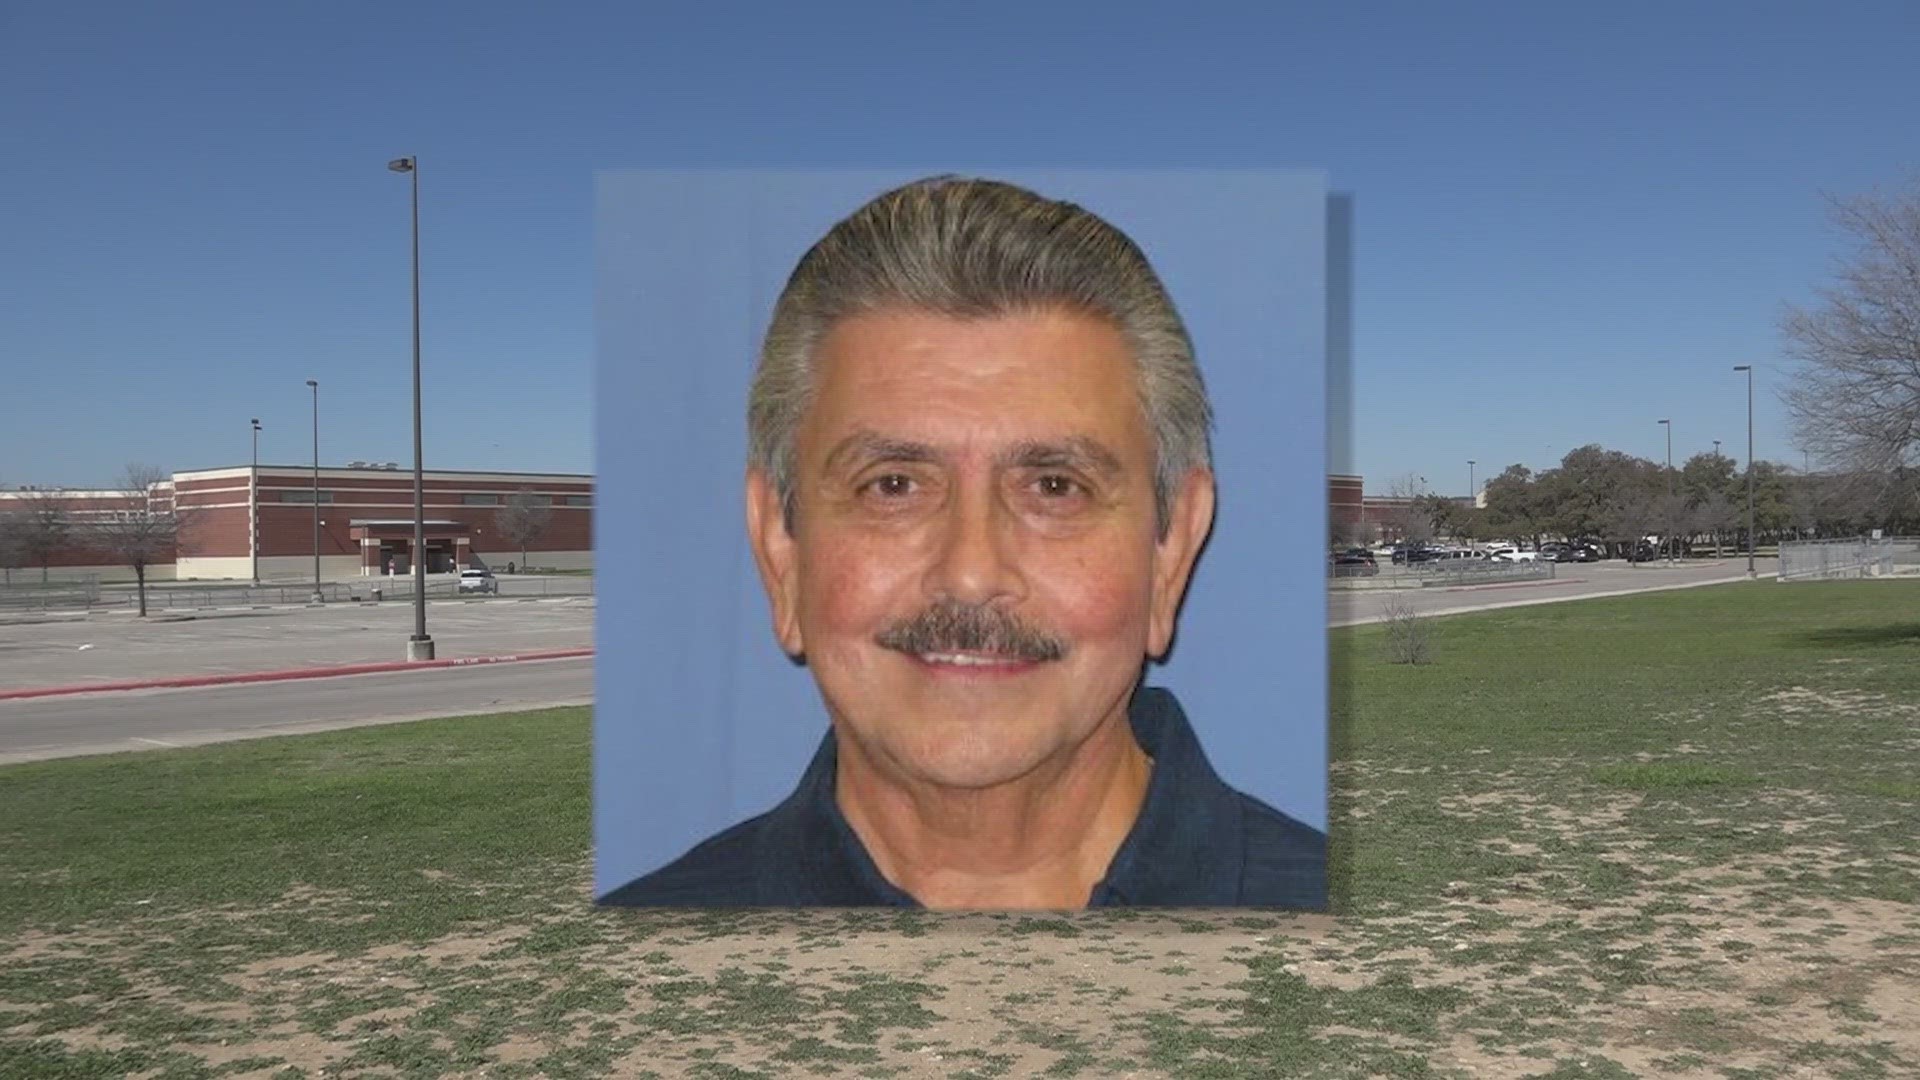 Northside ISD officials confirmed 73-year-old Alfred Jimenez passed away.